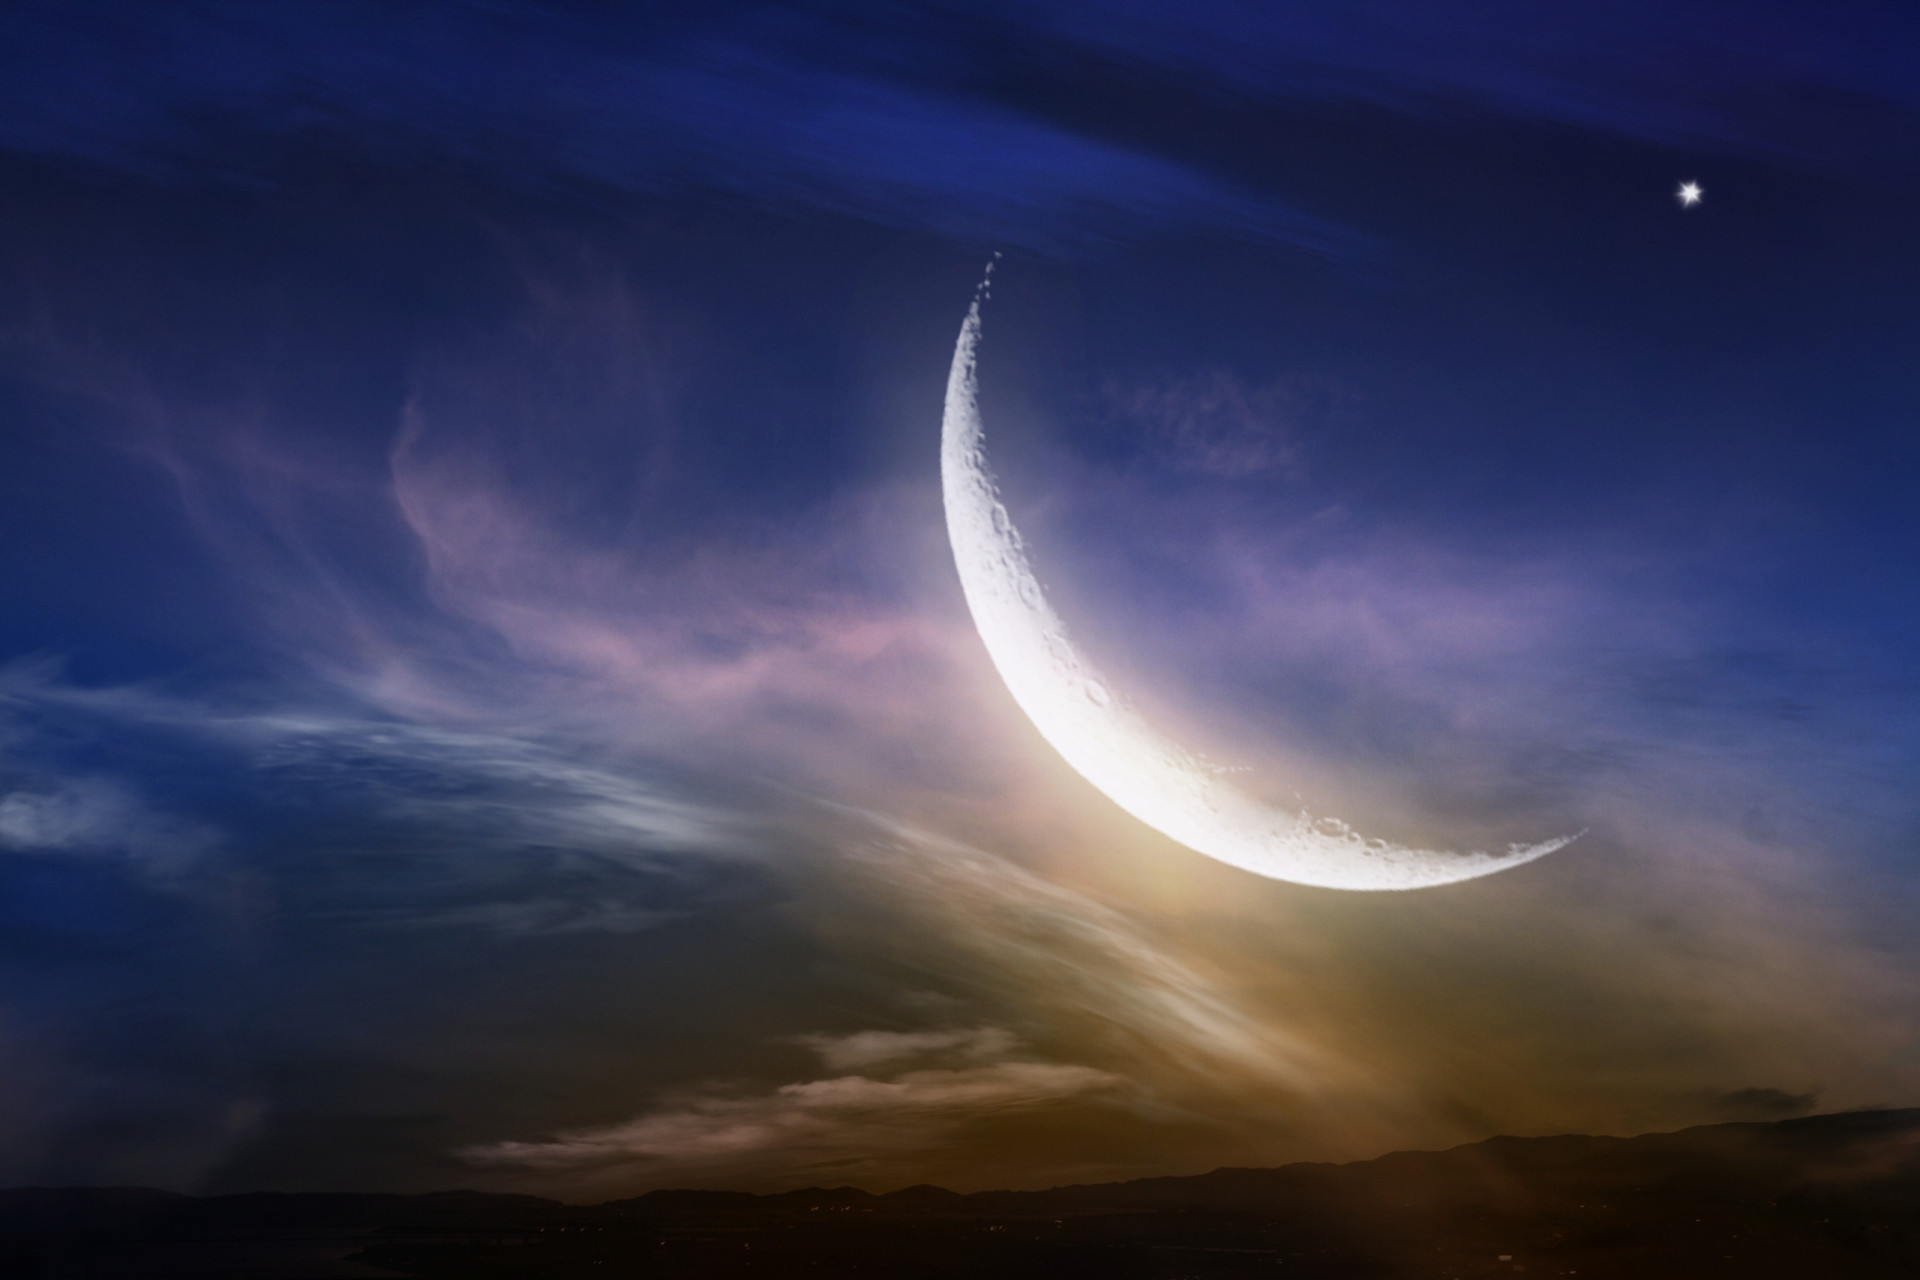 <p>A new moon in Cancer, the sign of the home, family, and our roots, takes place on July 5. It's time to begin again and set intentions for the month ahead.</p><p><a href="https://www.msn.com/en-ca/community/channel/vid-7xx8mnucu55yw63we9va2gwr7uihbxwc68fxqp25x6tg4ftibpra?cvid=94631541bc0f4f89bfd59158d696ad7e">Follow us and access great exclusive content every day</a></p>